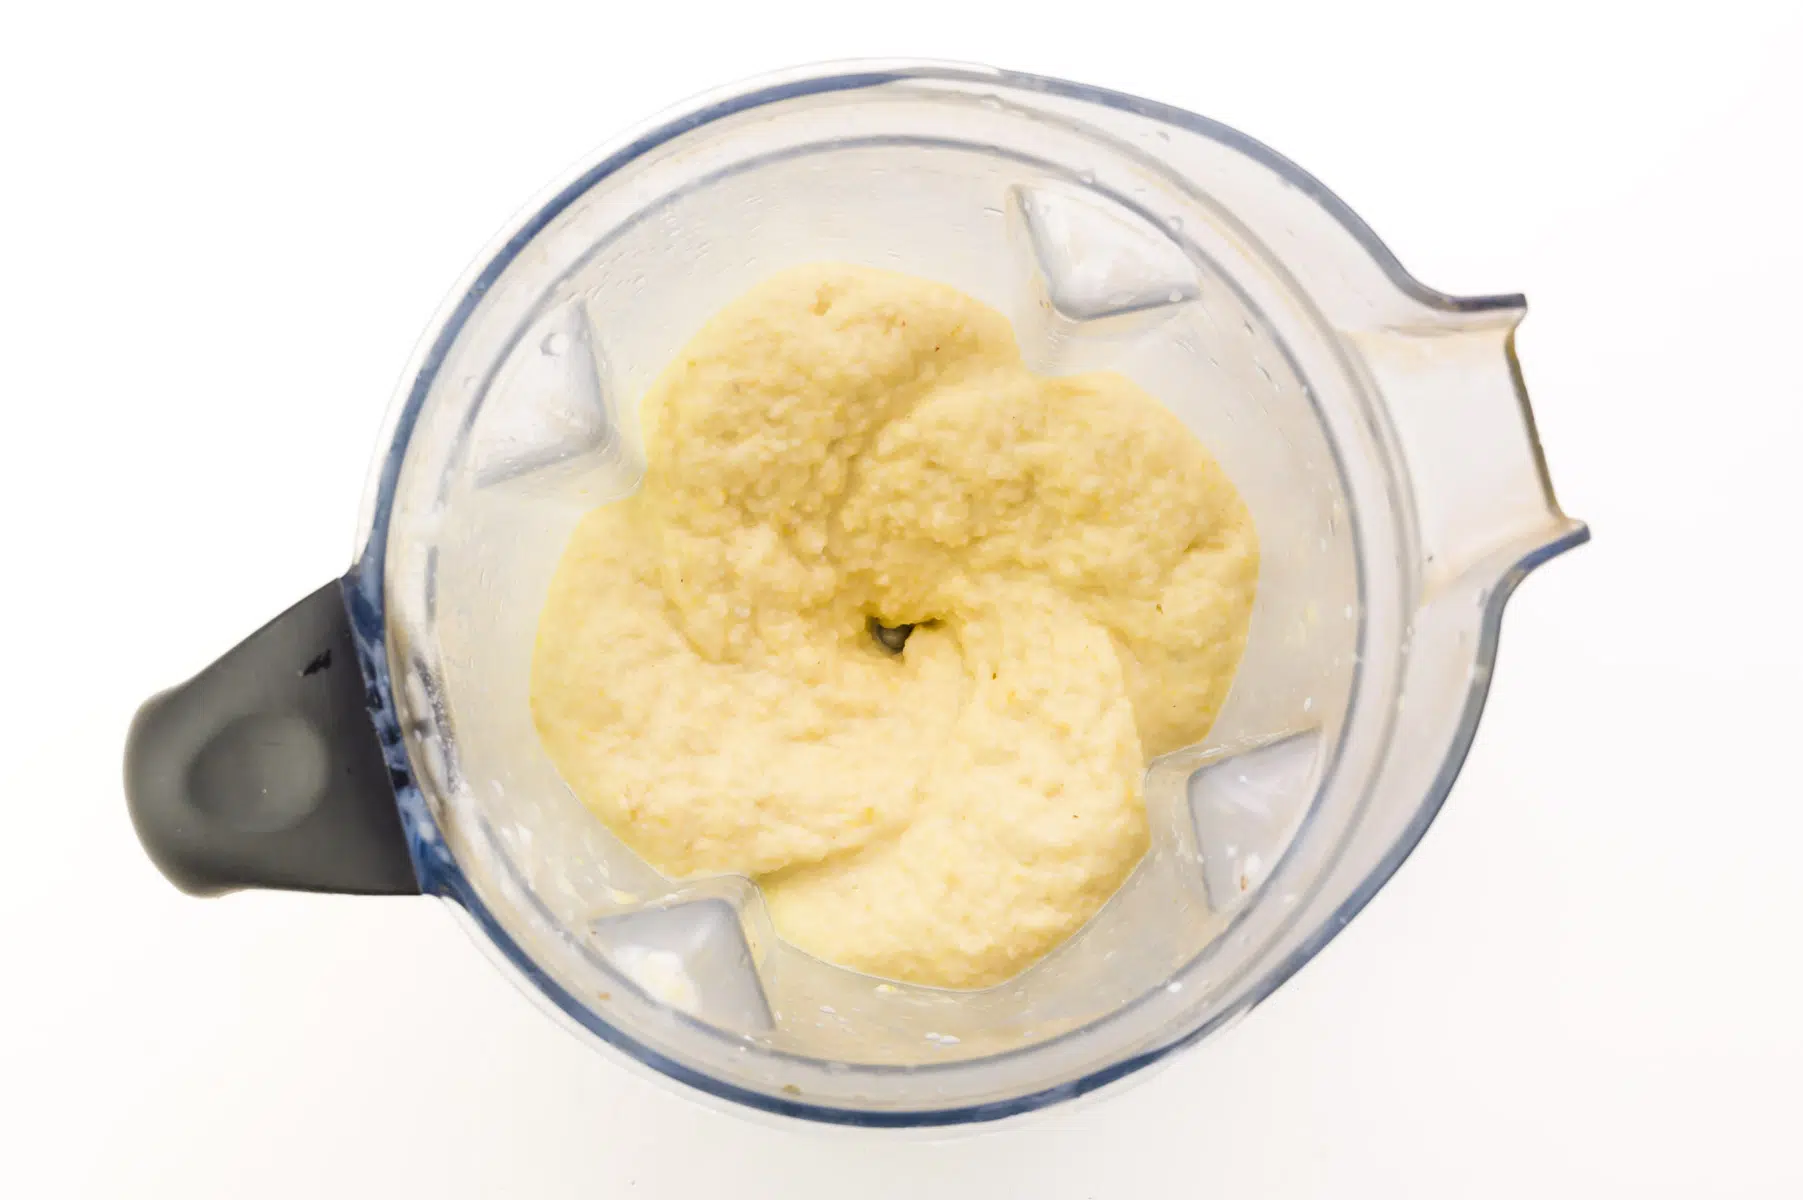 A whipped pineapple mixture is in the bottom of a blender jar.